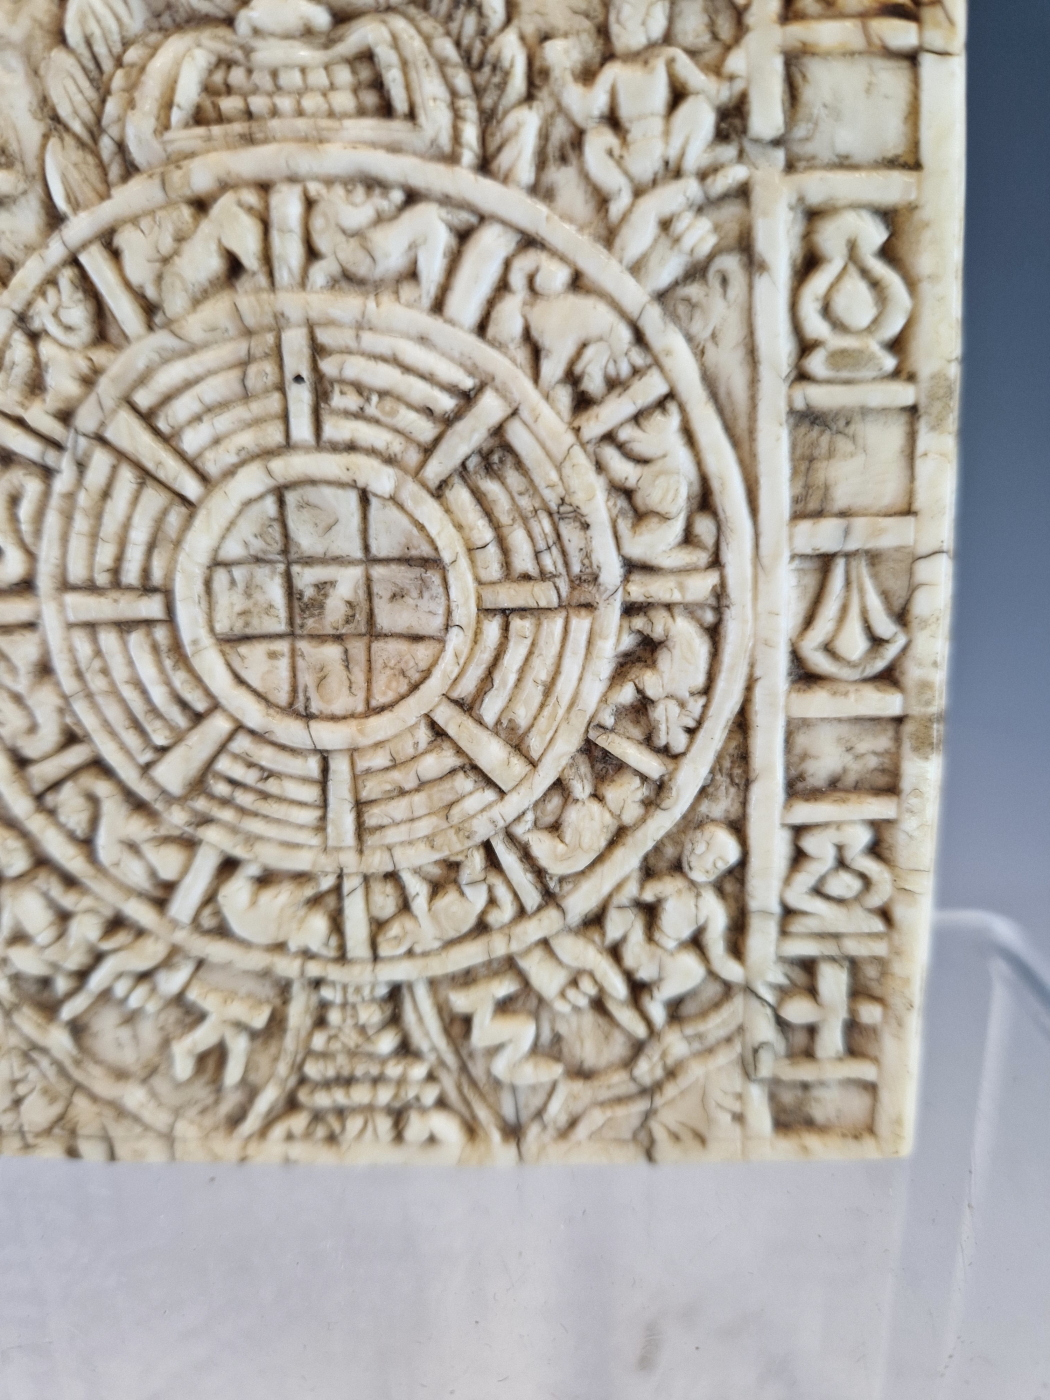 A TIBETAN ELEPHANT TOOTH PANEL CARVED WITH AN ASTROLOGICAL CALENDAR OR KALACHAKRA, THE WHEEL - Image 5 of 6